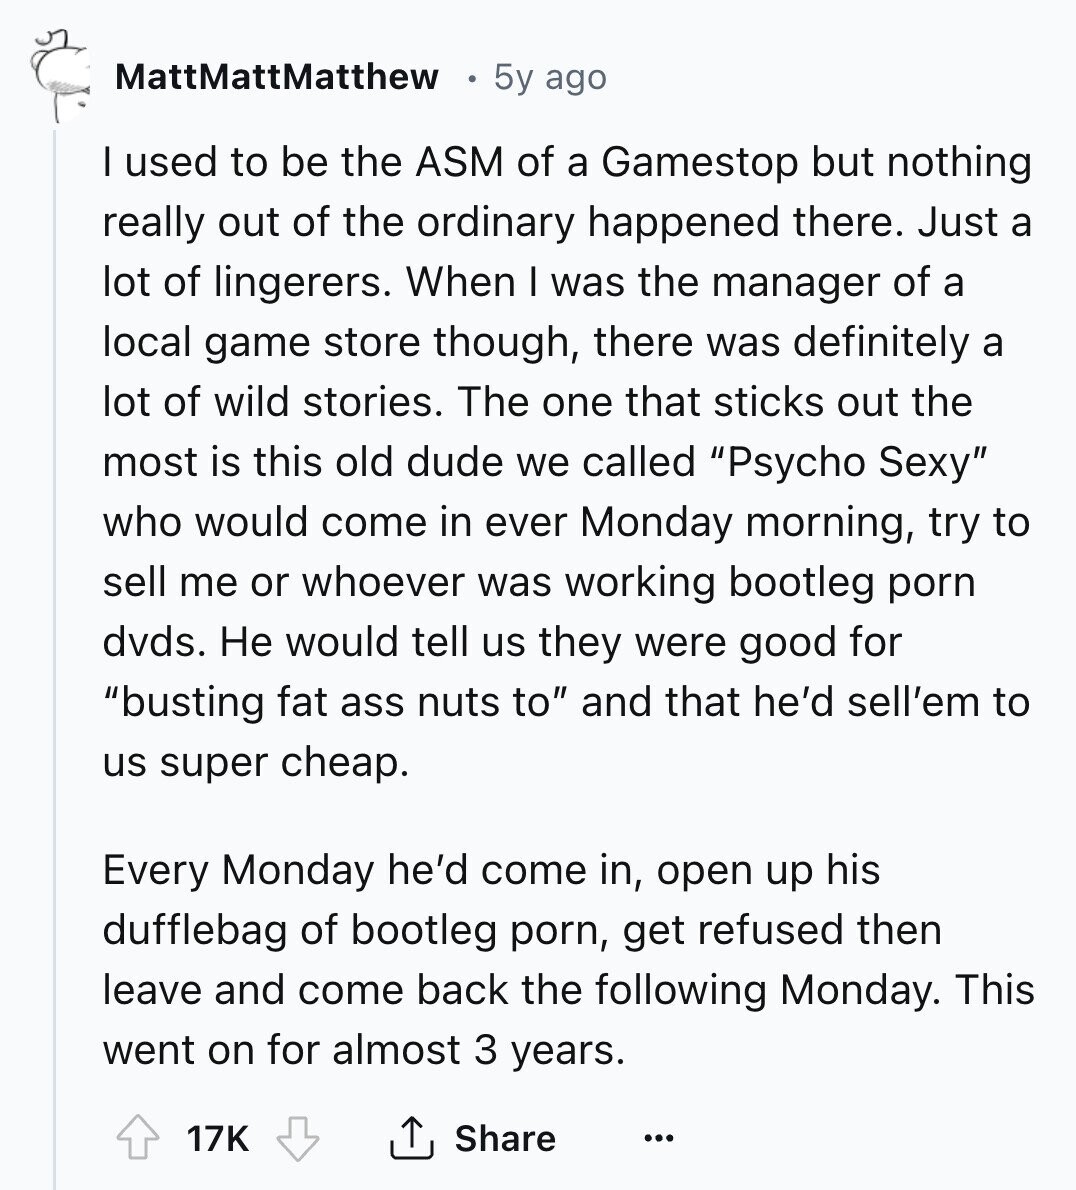 MattMattMatthew 5y ago I used to be the ASM of a Gamestop but nothing really out of the ordinary happened there. Just a lot of lingerers. When I was the manager of a local game store though, there was definitely a lot of wild stories. The one that sticks out the most is this old dude we called Psycho Sexy who would come in ever Monday morning, try to sell me or whoever was working bootleg porn dvds. Не would tell us they were good for busting fat ass nuts to and that he'd sell'em to us super cheap. Every 